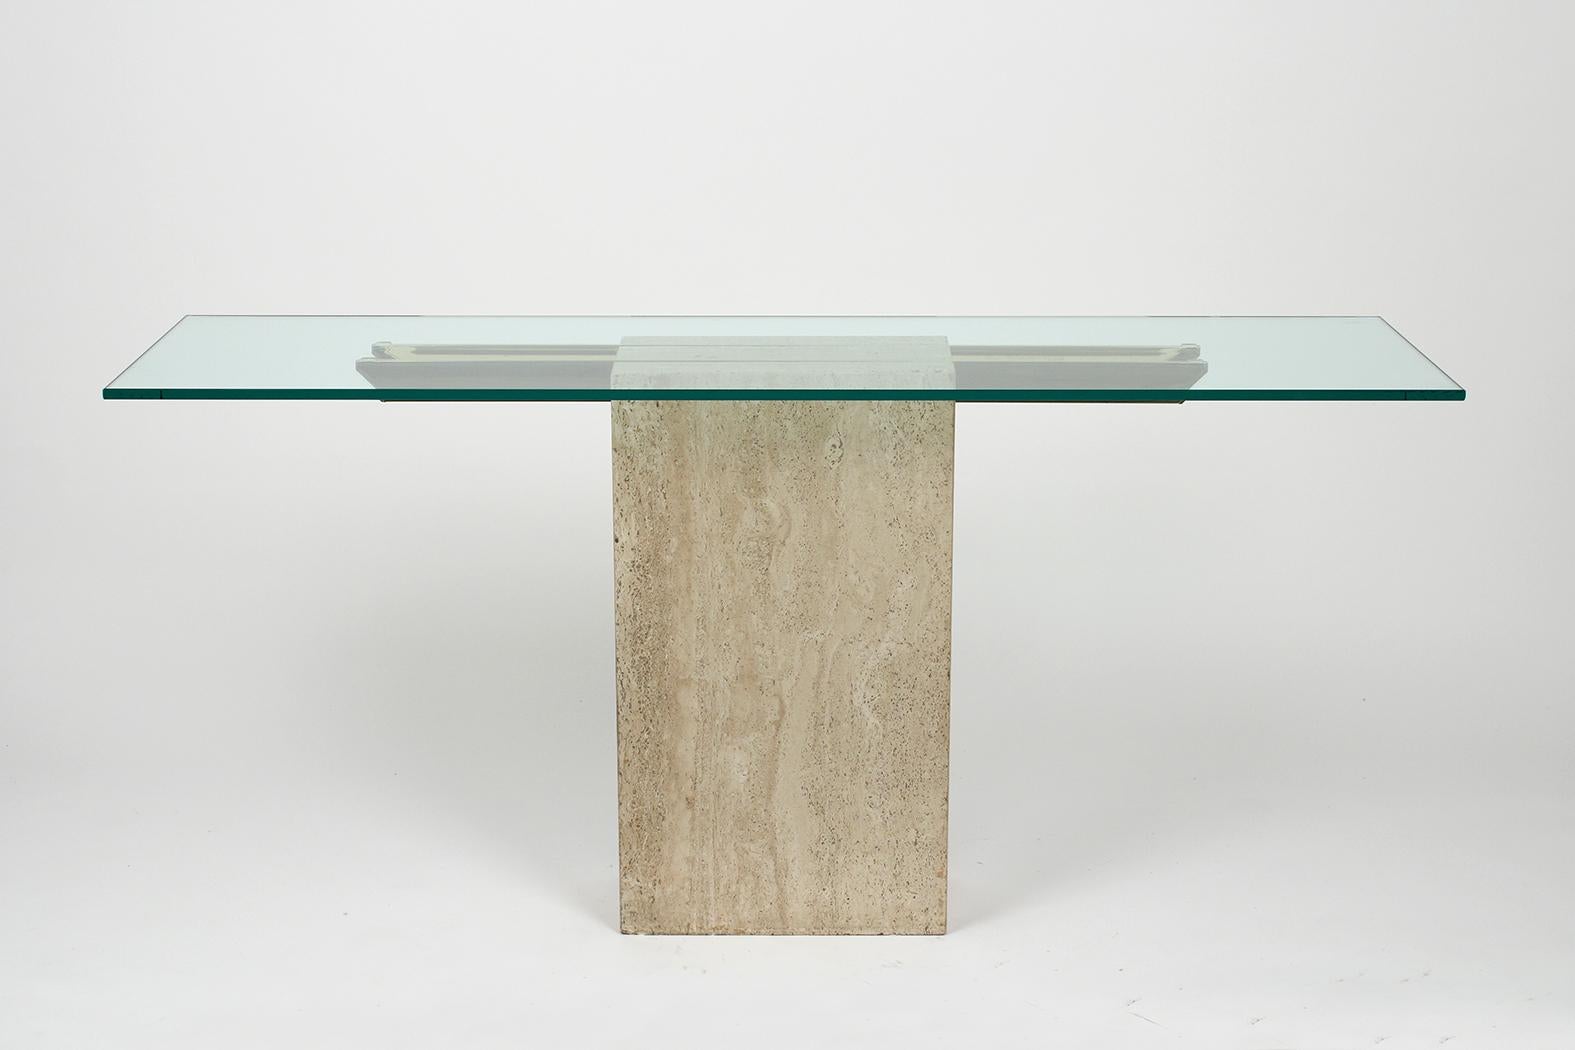 This Mid-Century Modern Style Console is in great condition and features a Travertine pedestal base with two brass inserts bar embedded across the top. On top of the console, base rests a new 1/2 inch clear tempered glass with a flat polished finish